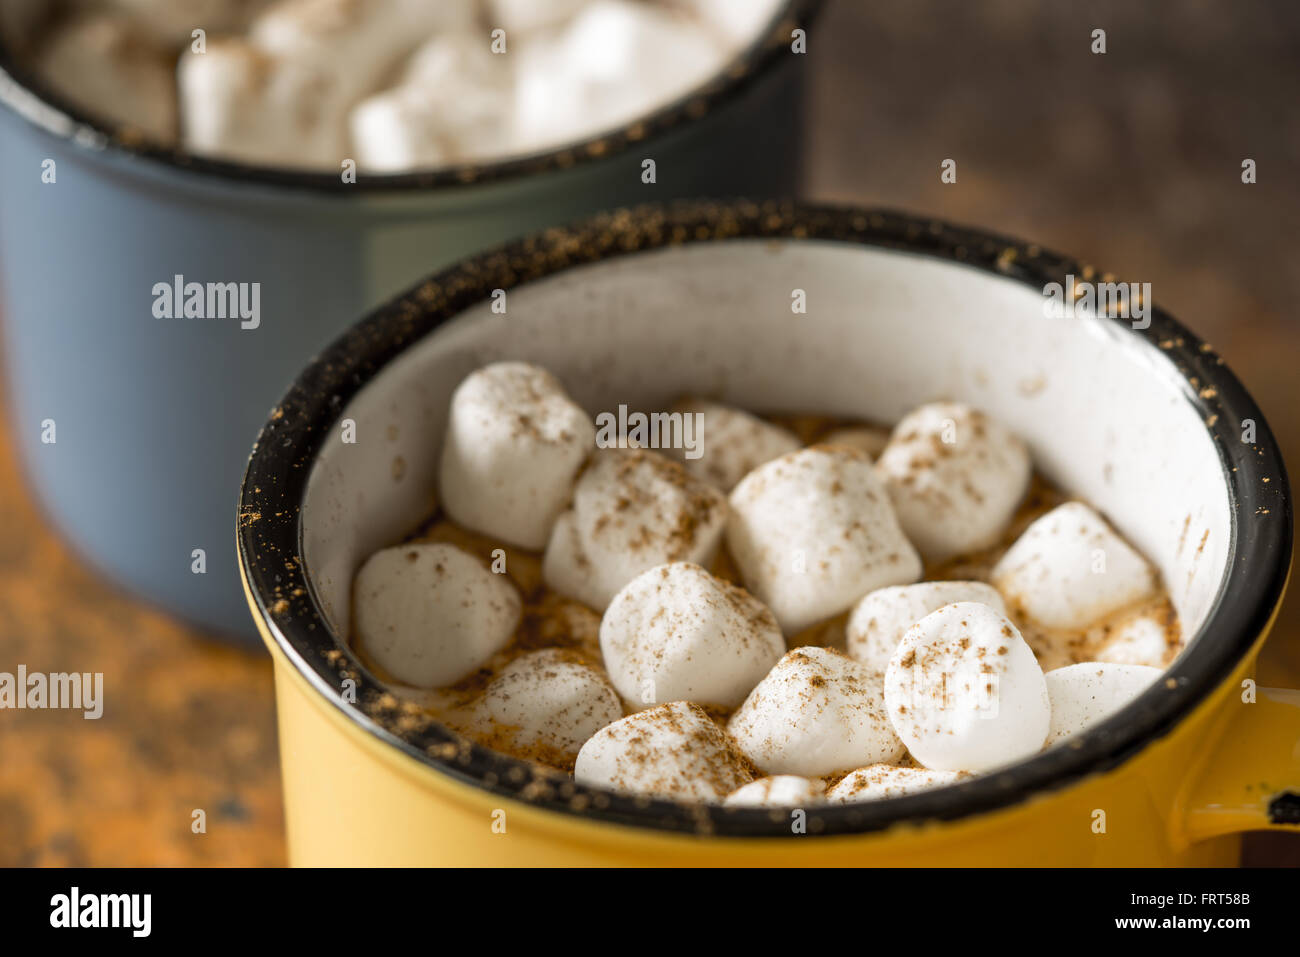 Cups of cocoa with marshmallows horizontal Stock Photo